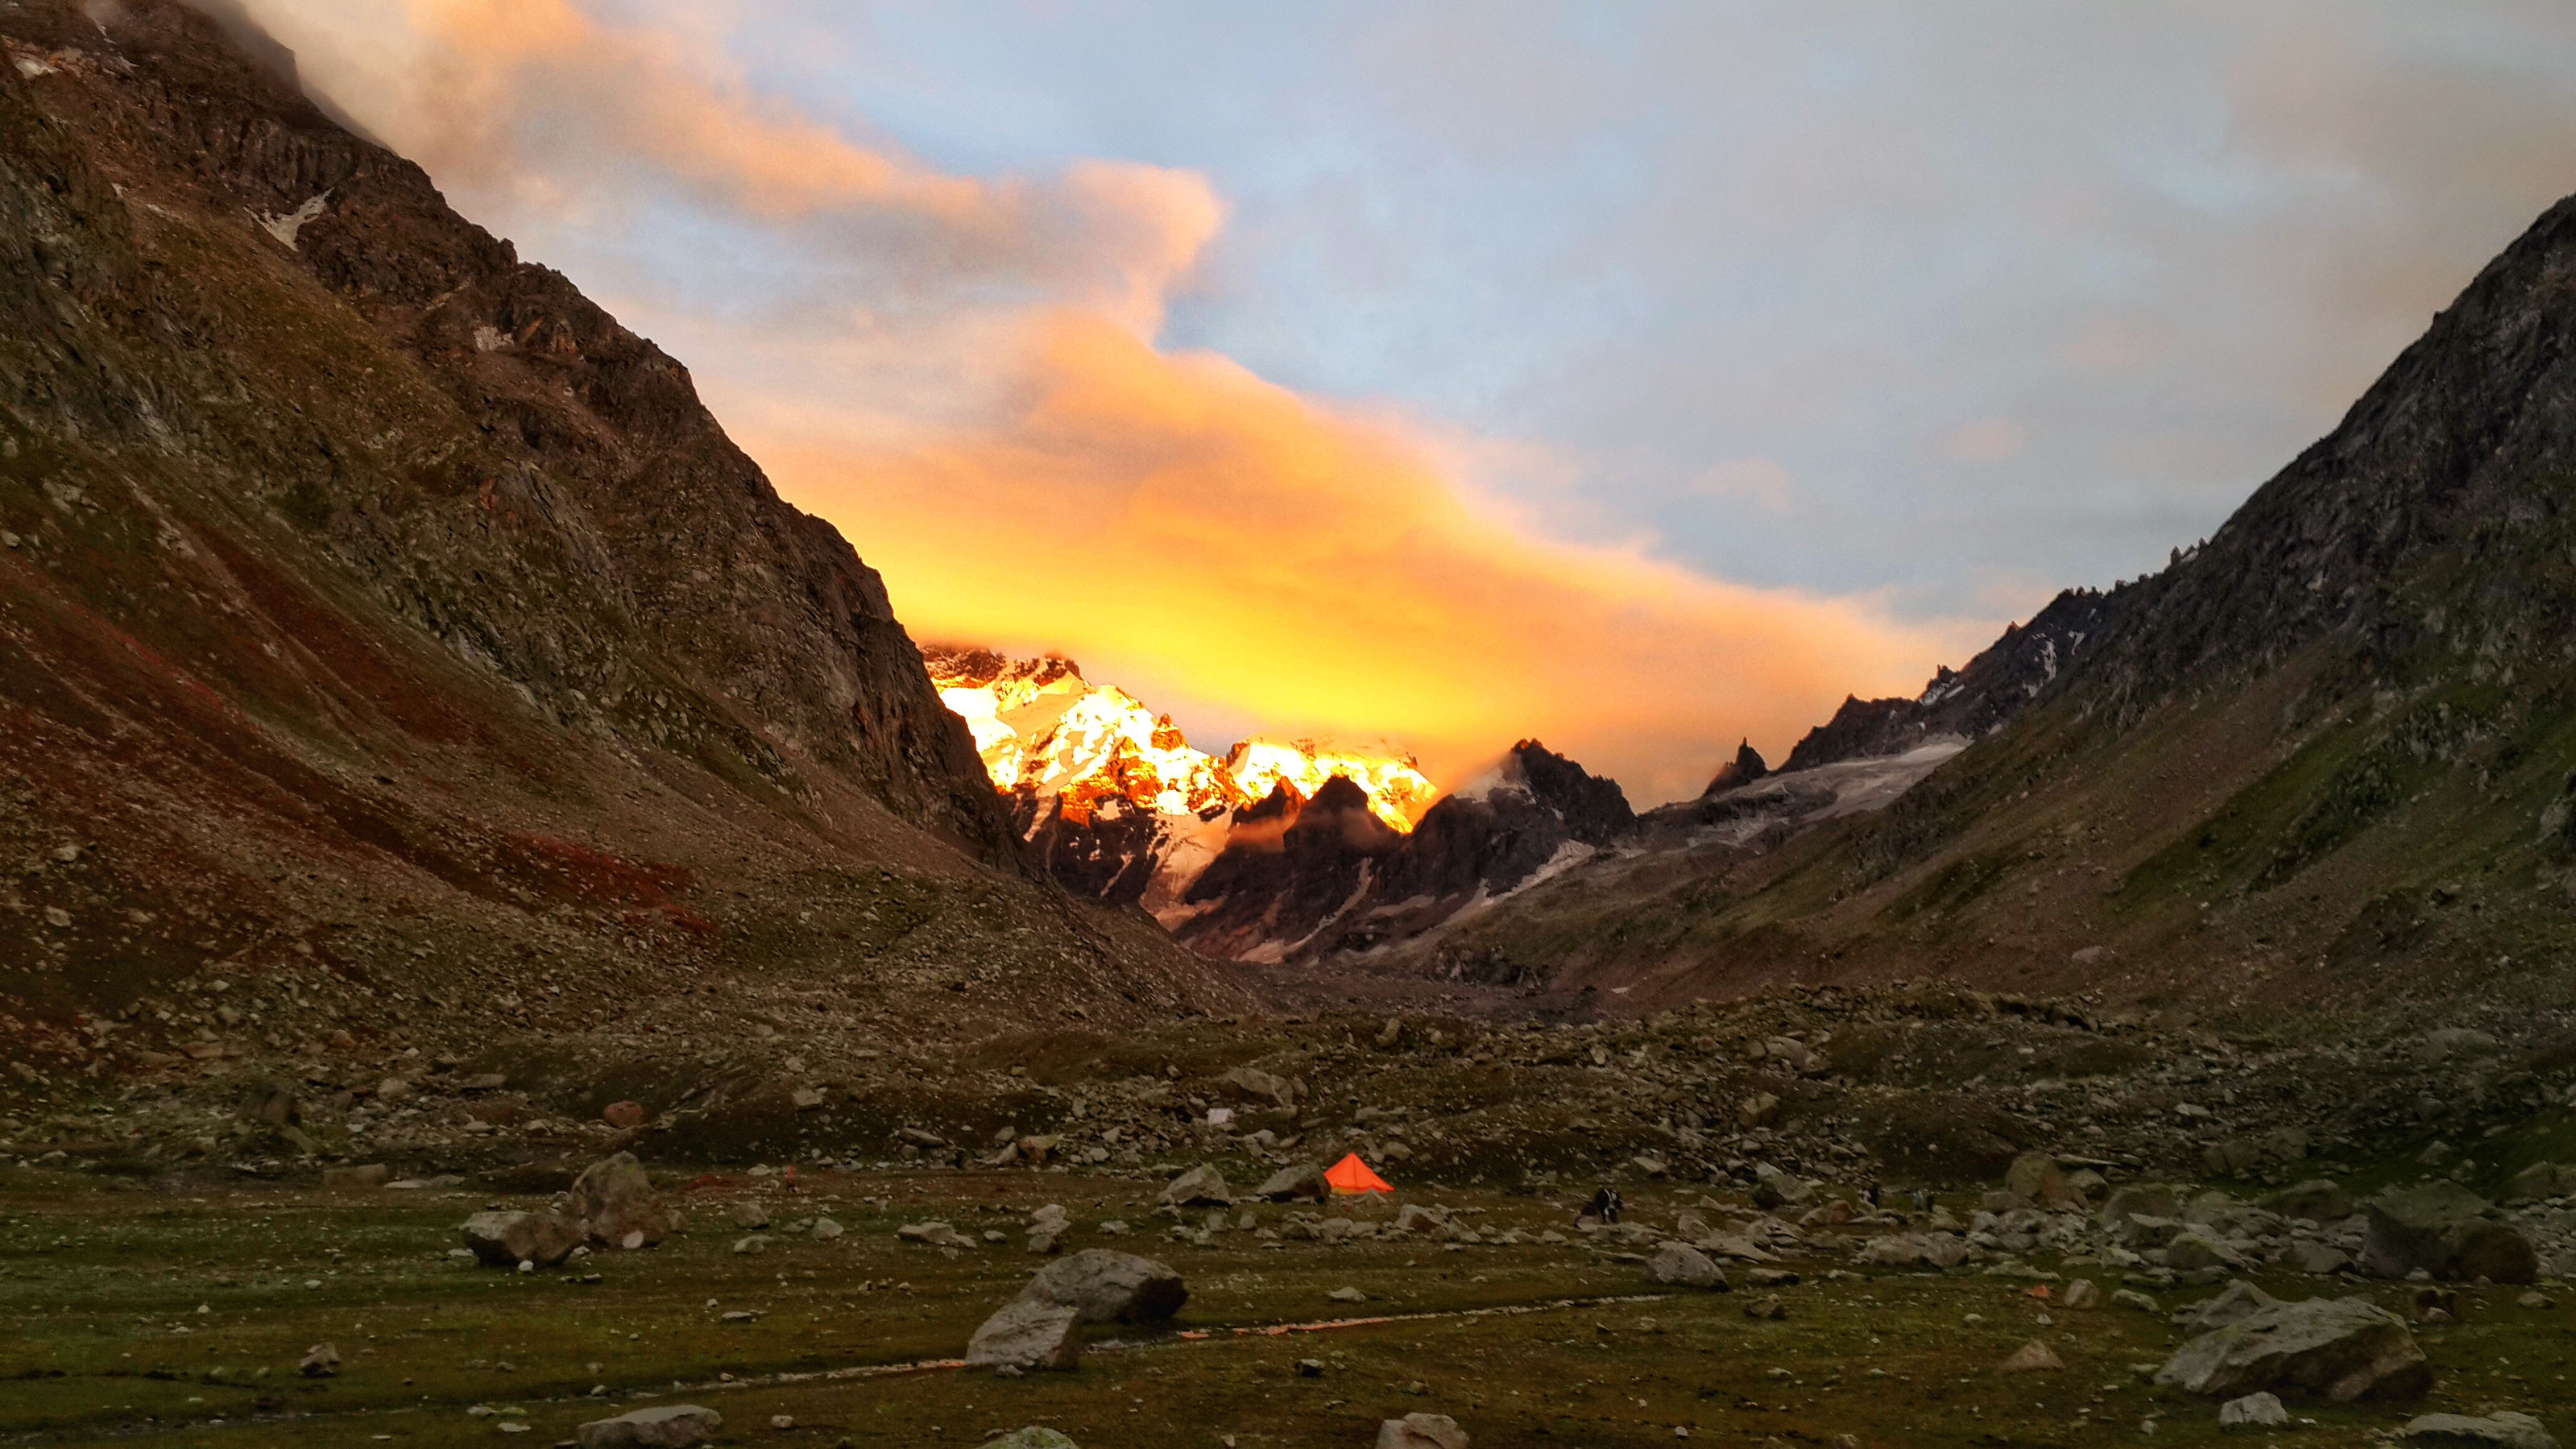 The view of Hampta Pass with the sun's rays and snow